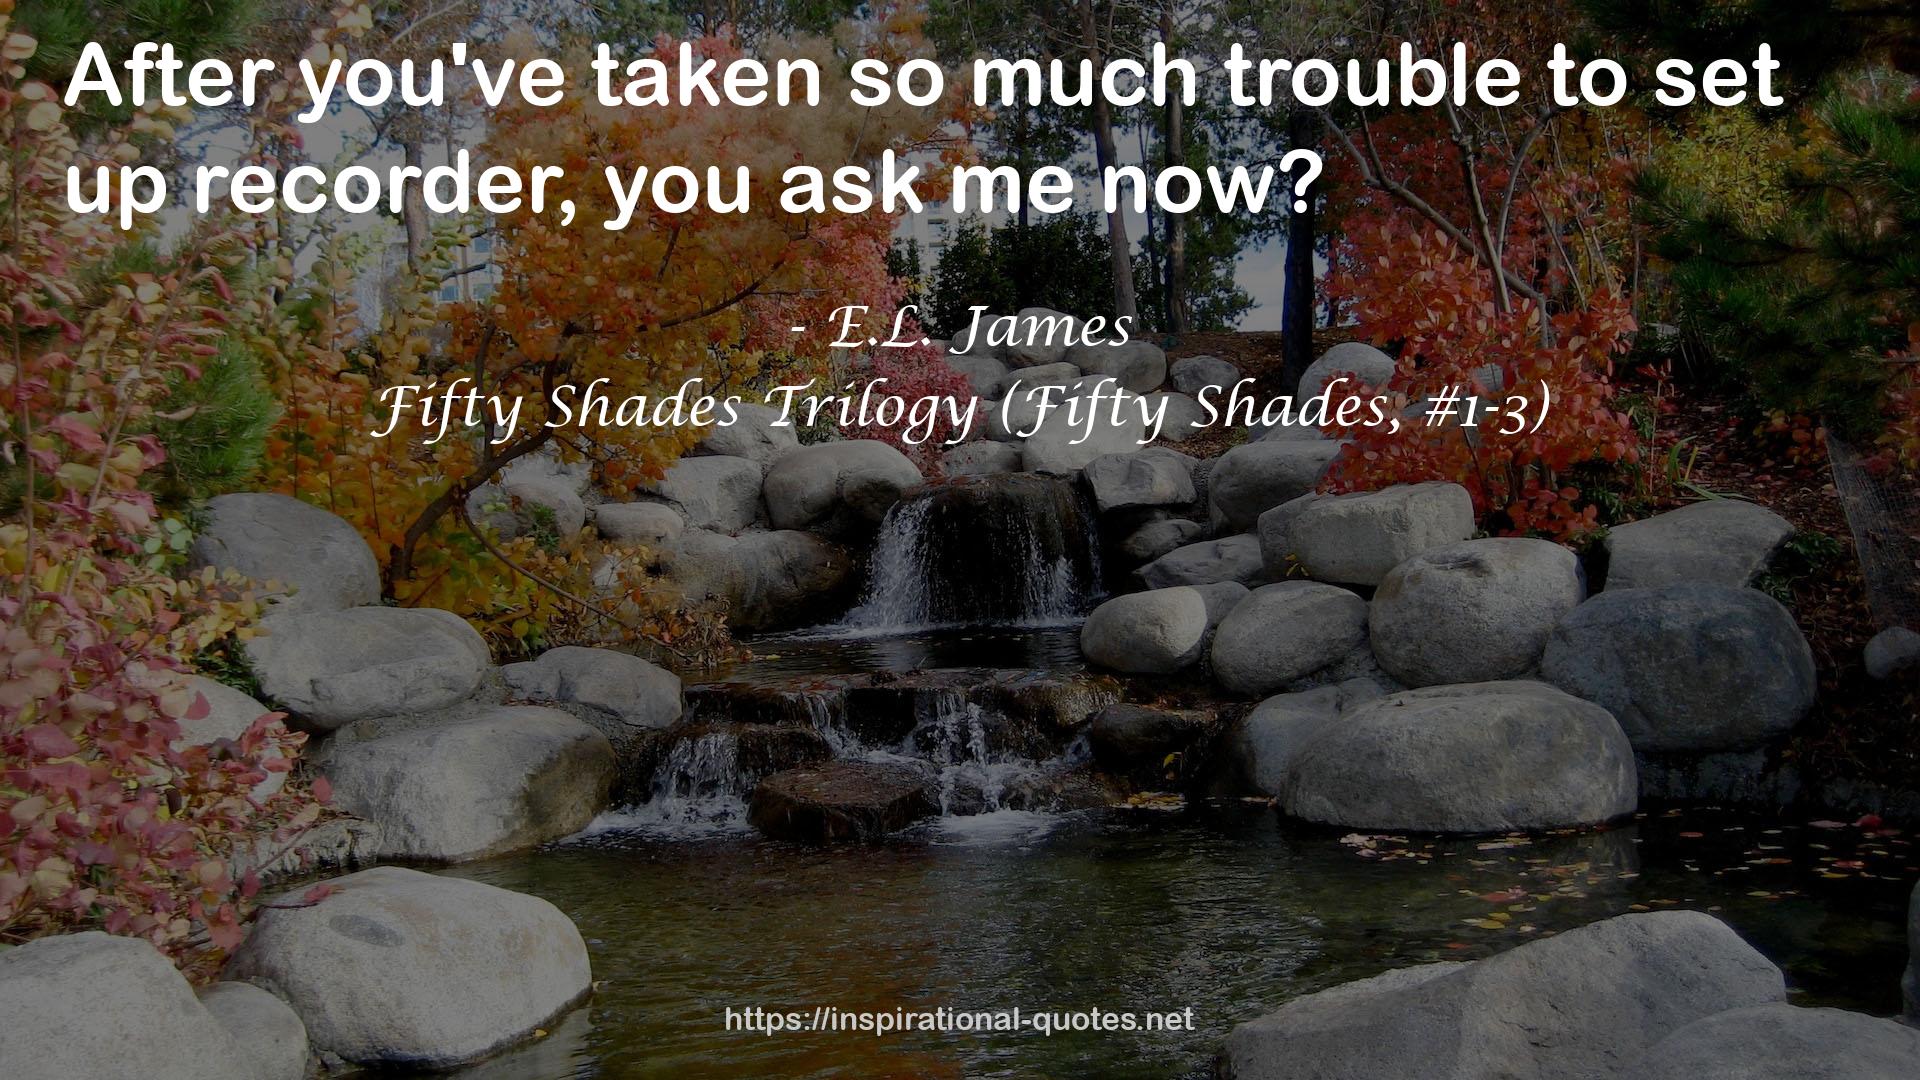 Fifty Shades Trilogy (Fifty Shades, #1-3) QUOTES